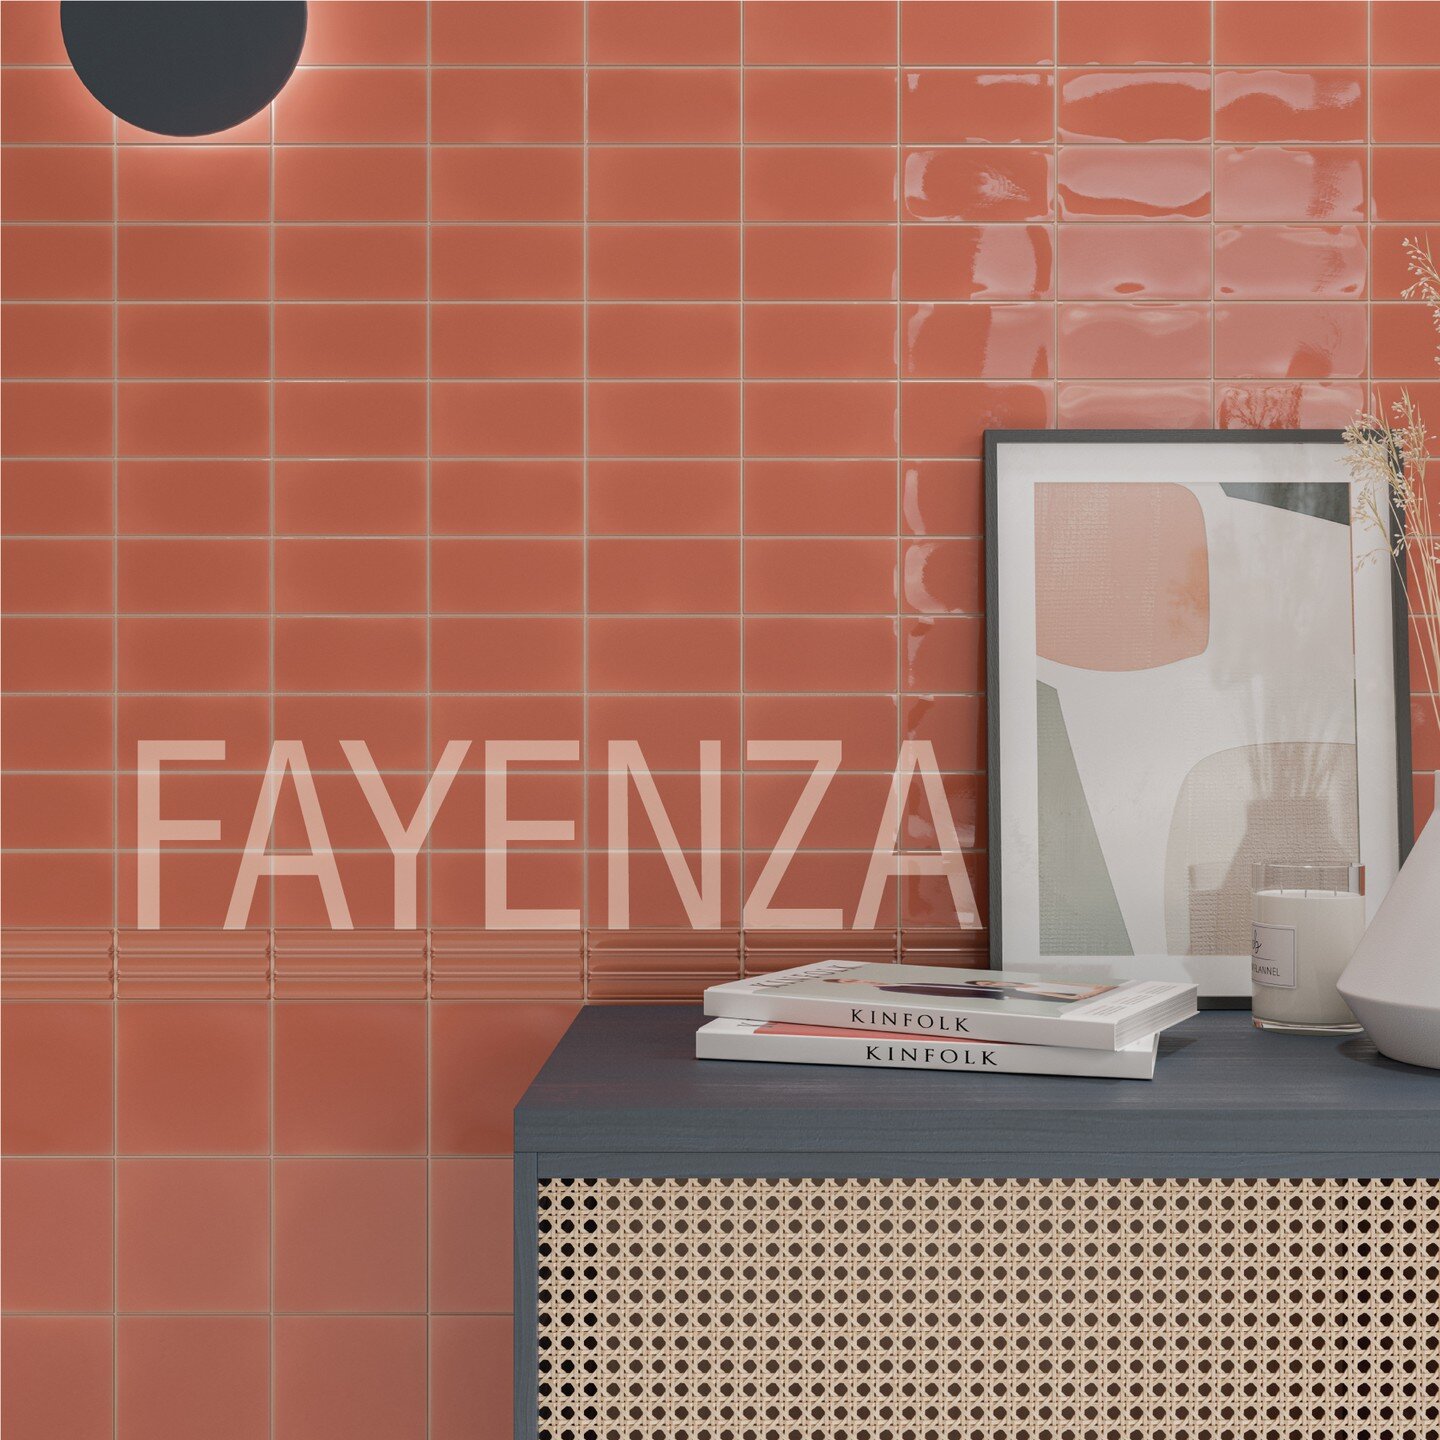 Fayenza ceramic tiles from Spain. A translucent creation, showcasing the fluidity and beauty of crystalline glazes. 

Available in 8 colors 
2.5&quot; x 5&quot; belt, 2.5&quot; x 5&quot; flat and 5&quot; x 5&quot; flat.